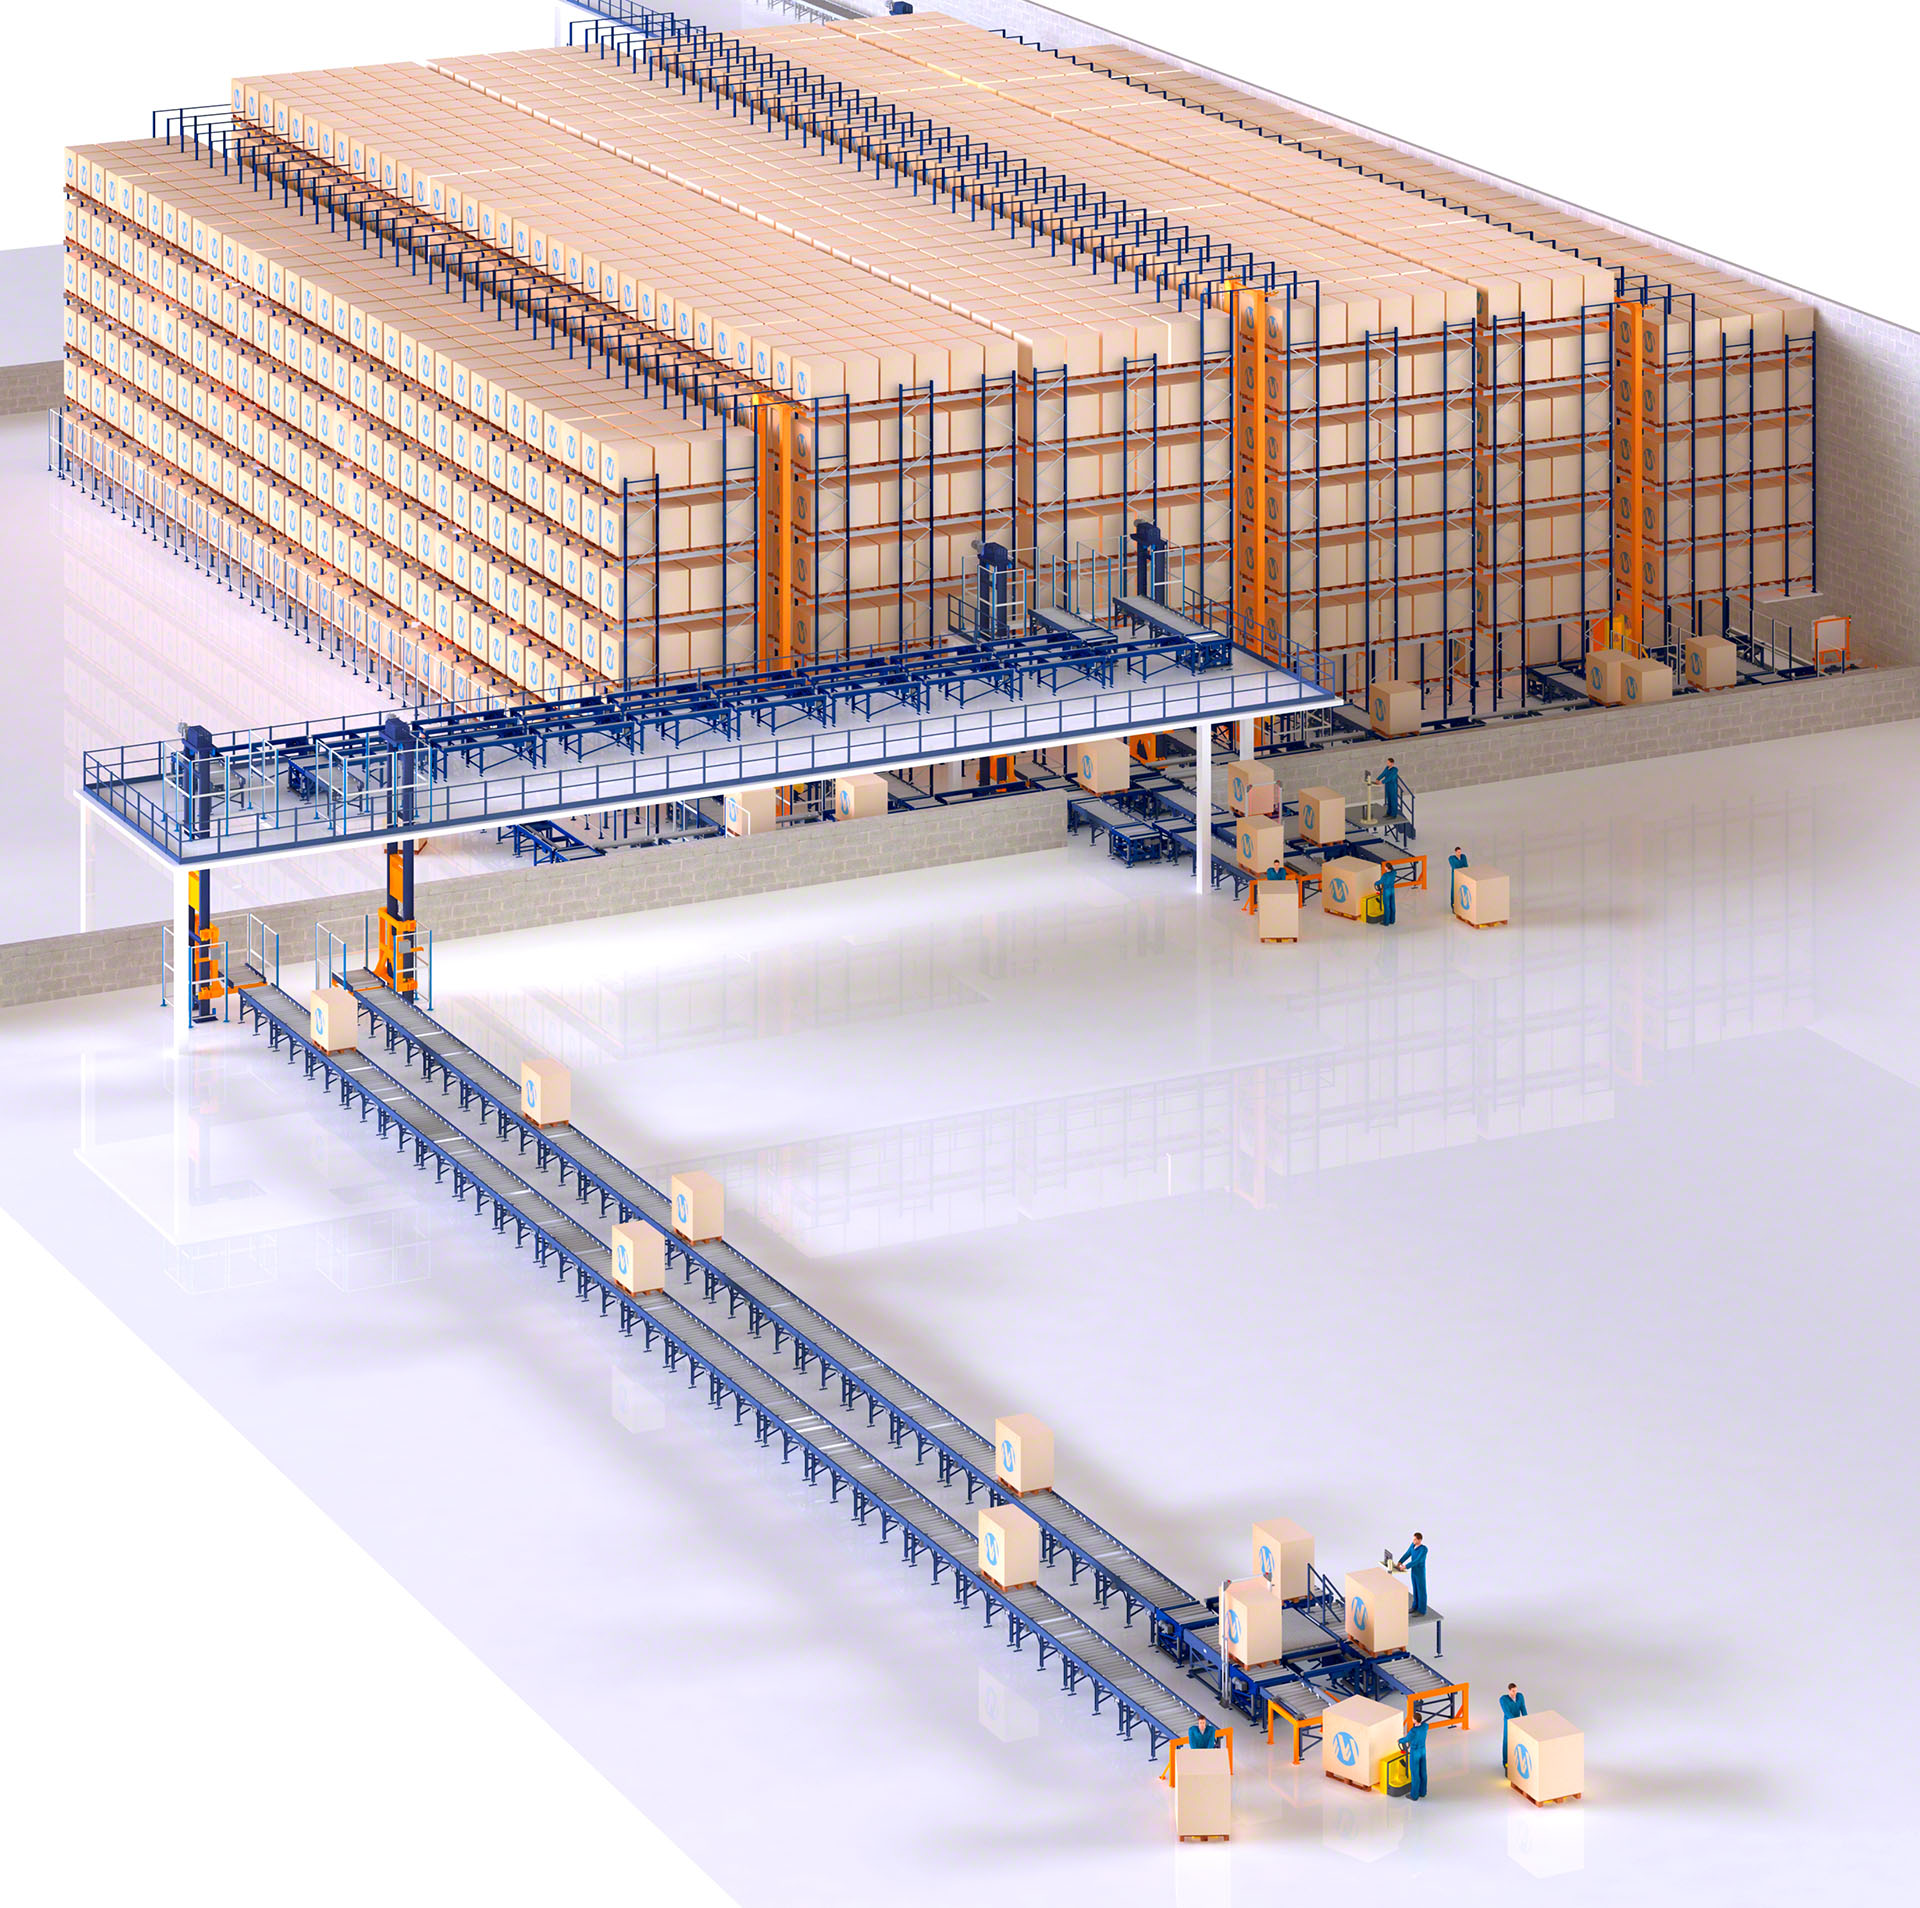 The automated Pallet Shuttle system can be adapted to low-bay warehouses